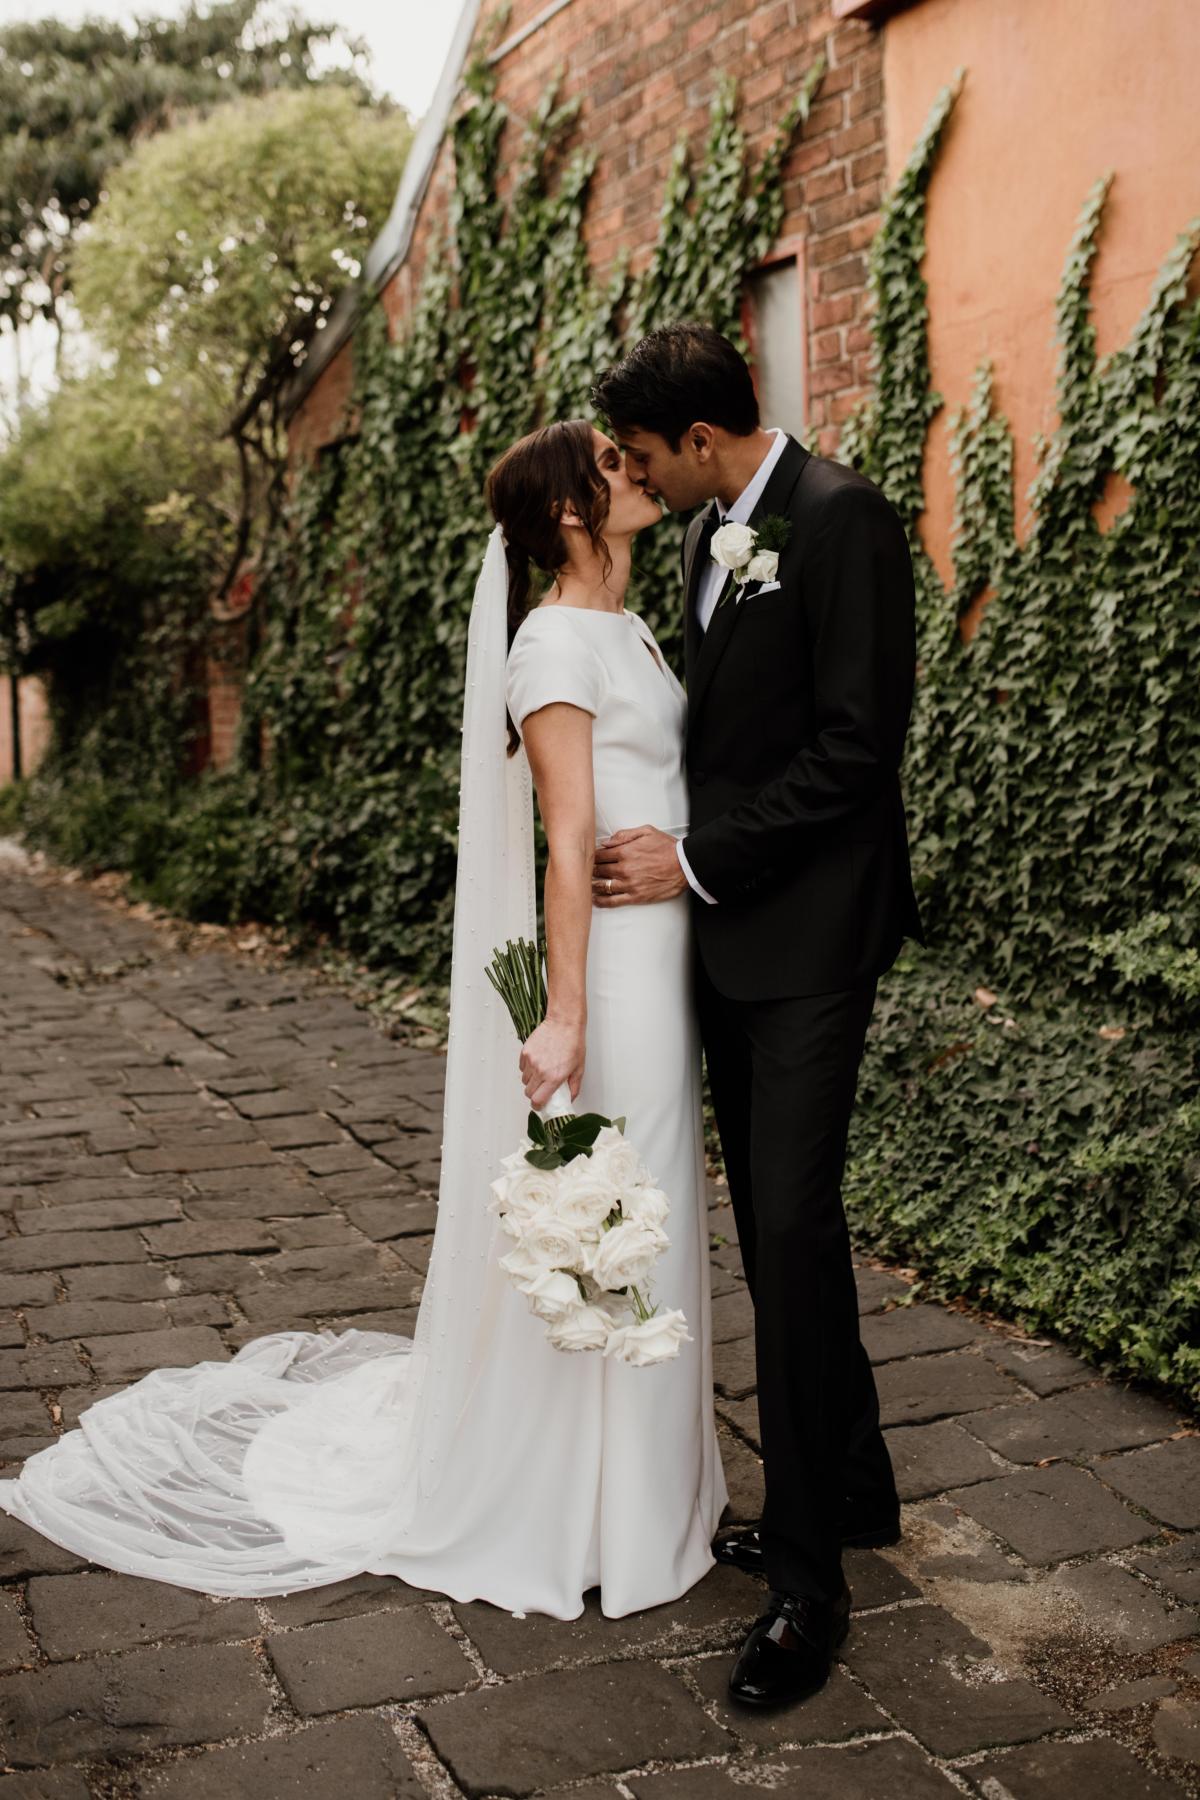 KWH real bride Jacqui and Chris kiss by the ivy wall. She wears the long pearl veil with her Clarissa gown, a fit and flare wedding dress with high neck cap sleeve.